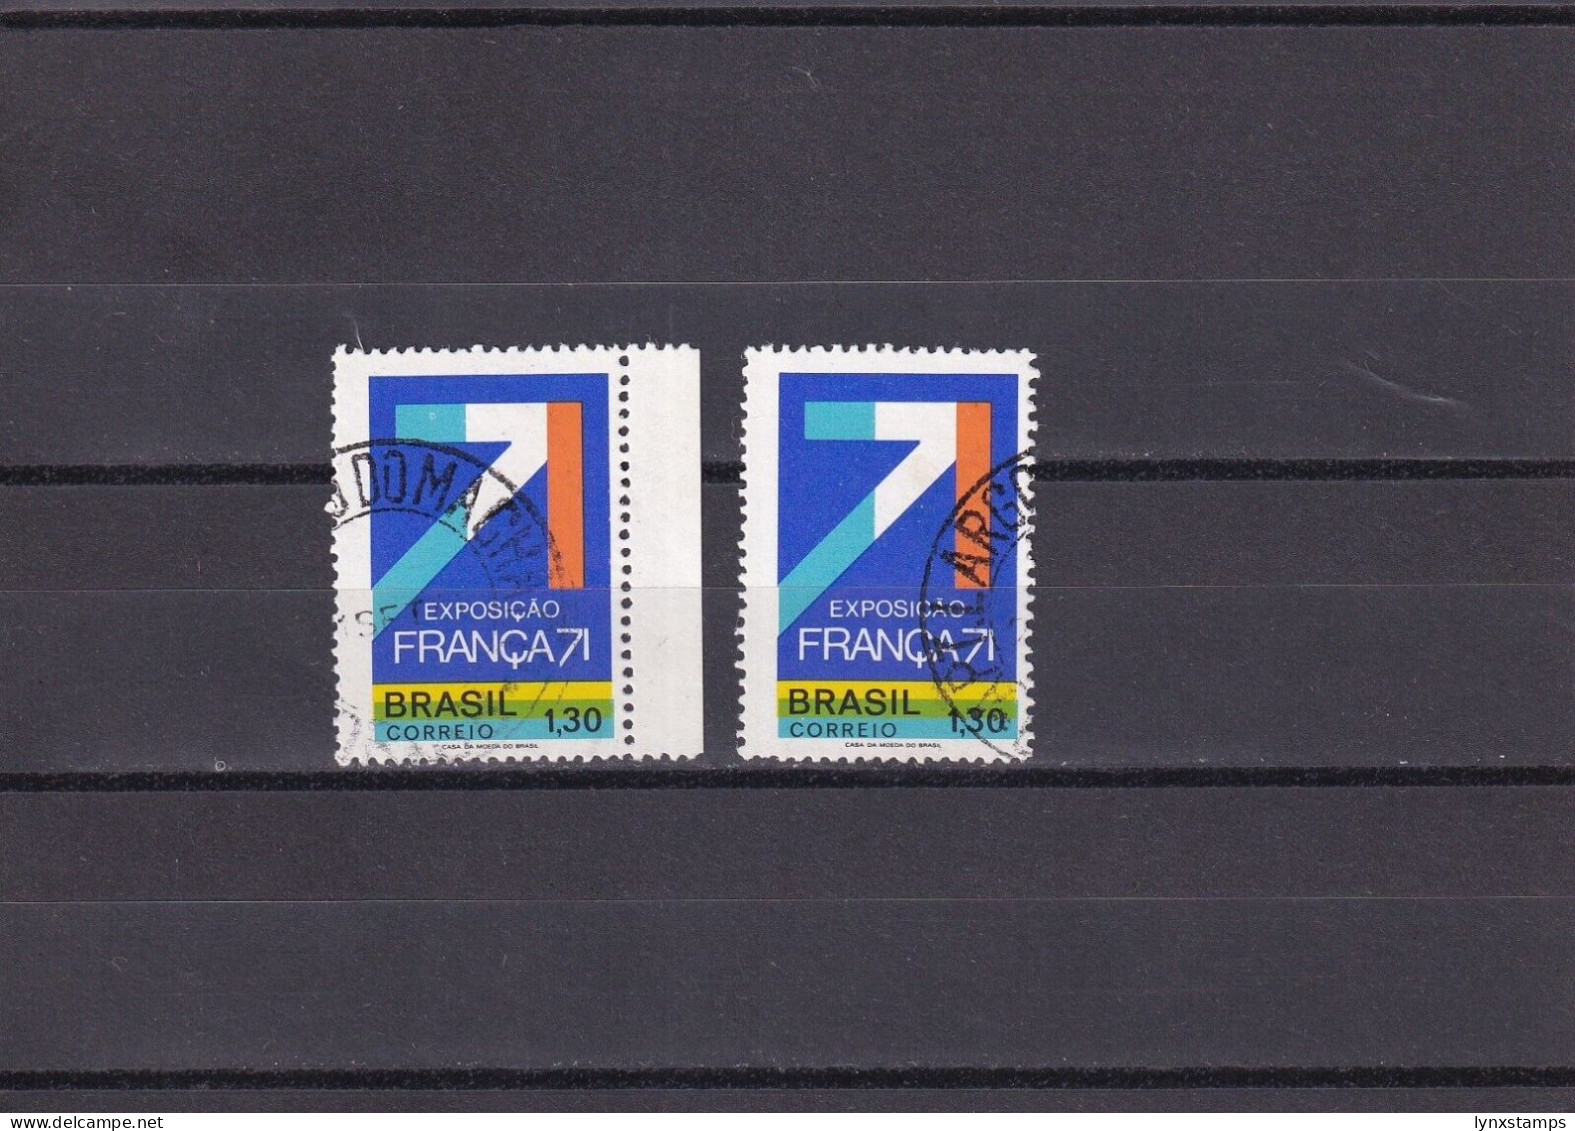 SA06 Brazil 1971 Industrial, Technical And Scientific Exhibition Franca 71 Used - Usados